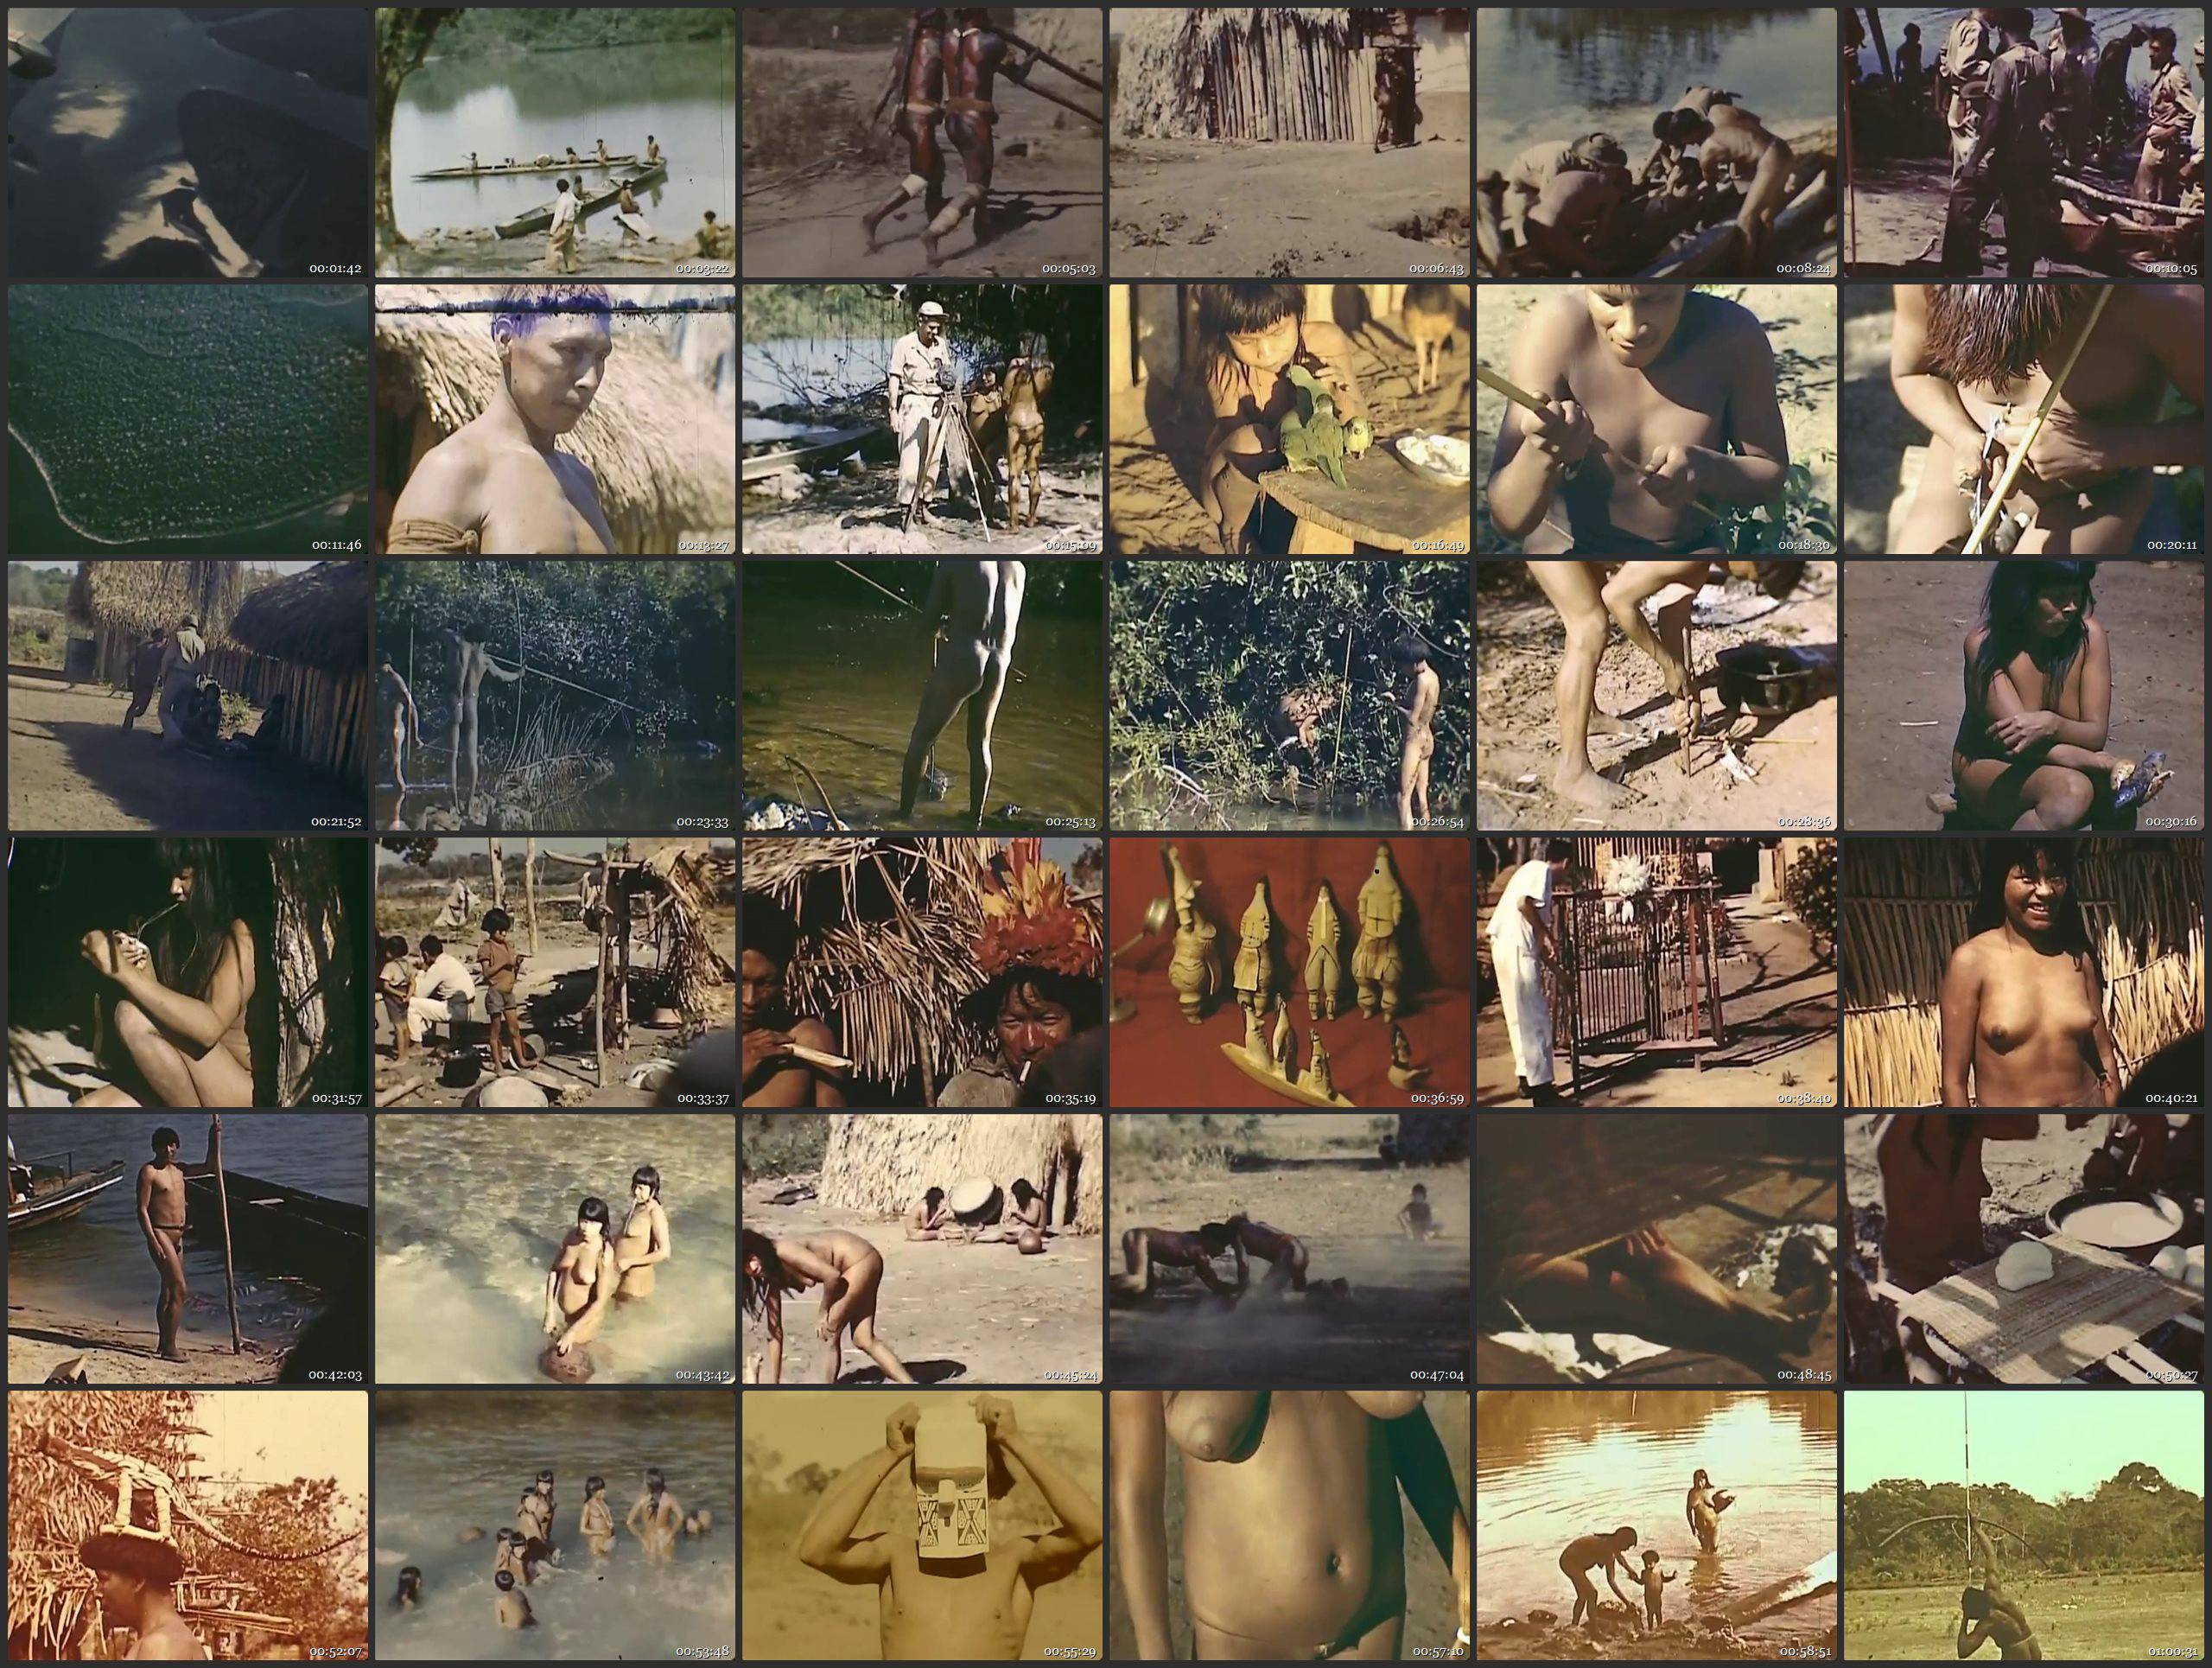 Nudist Videos Xingu Indians - Expedition to rainforests of Brazil in 1948 - Thumbnails